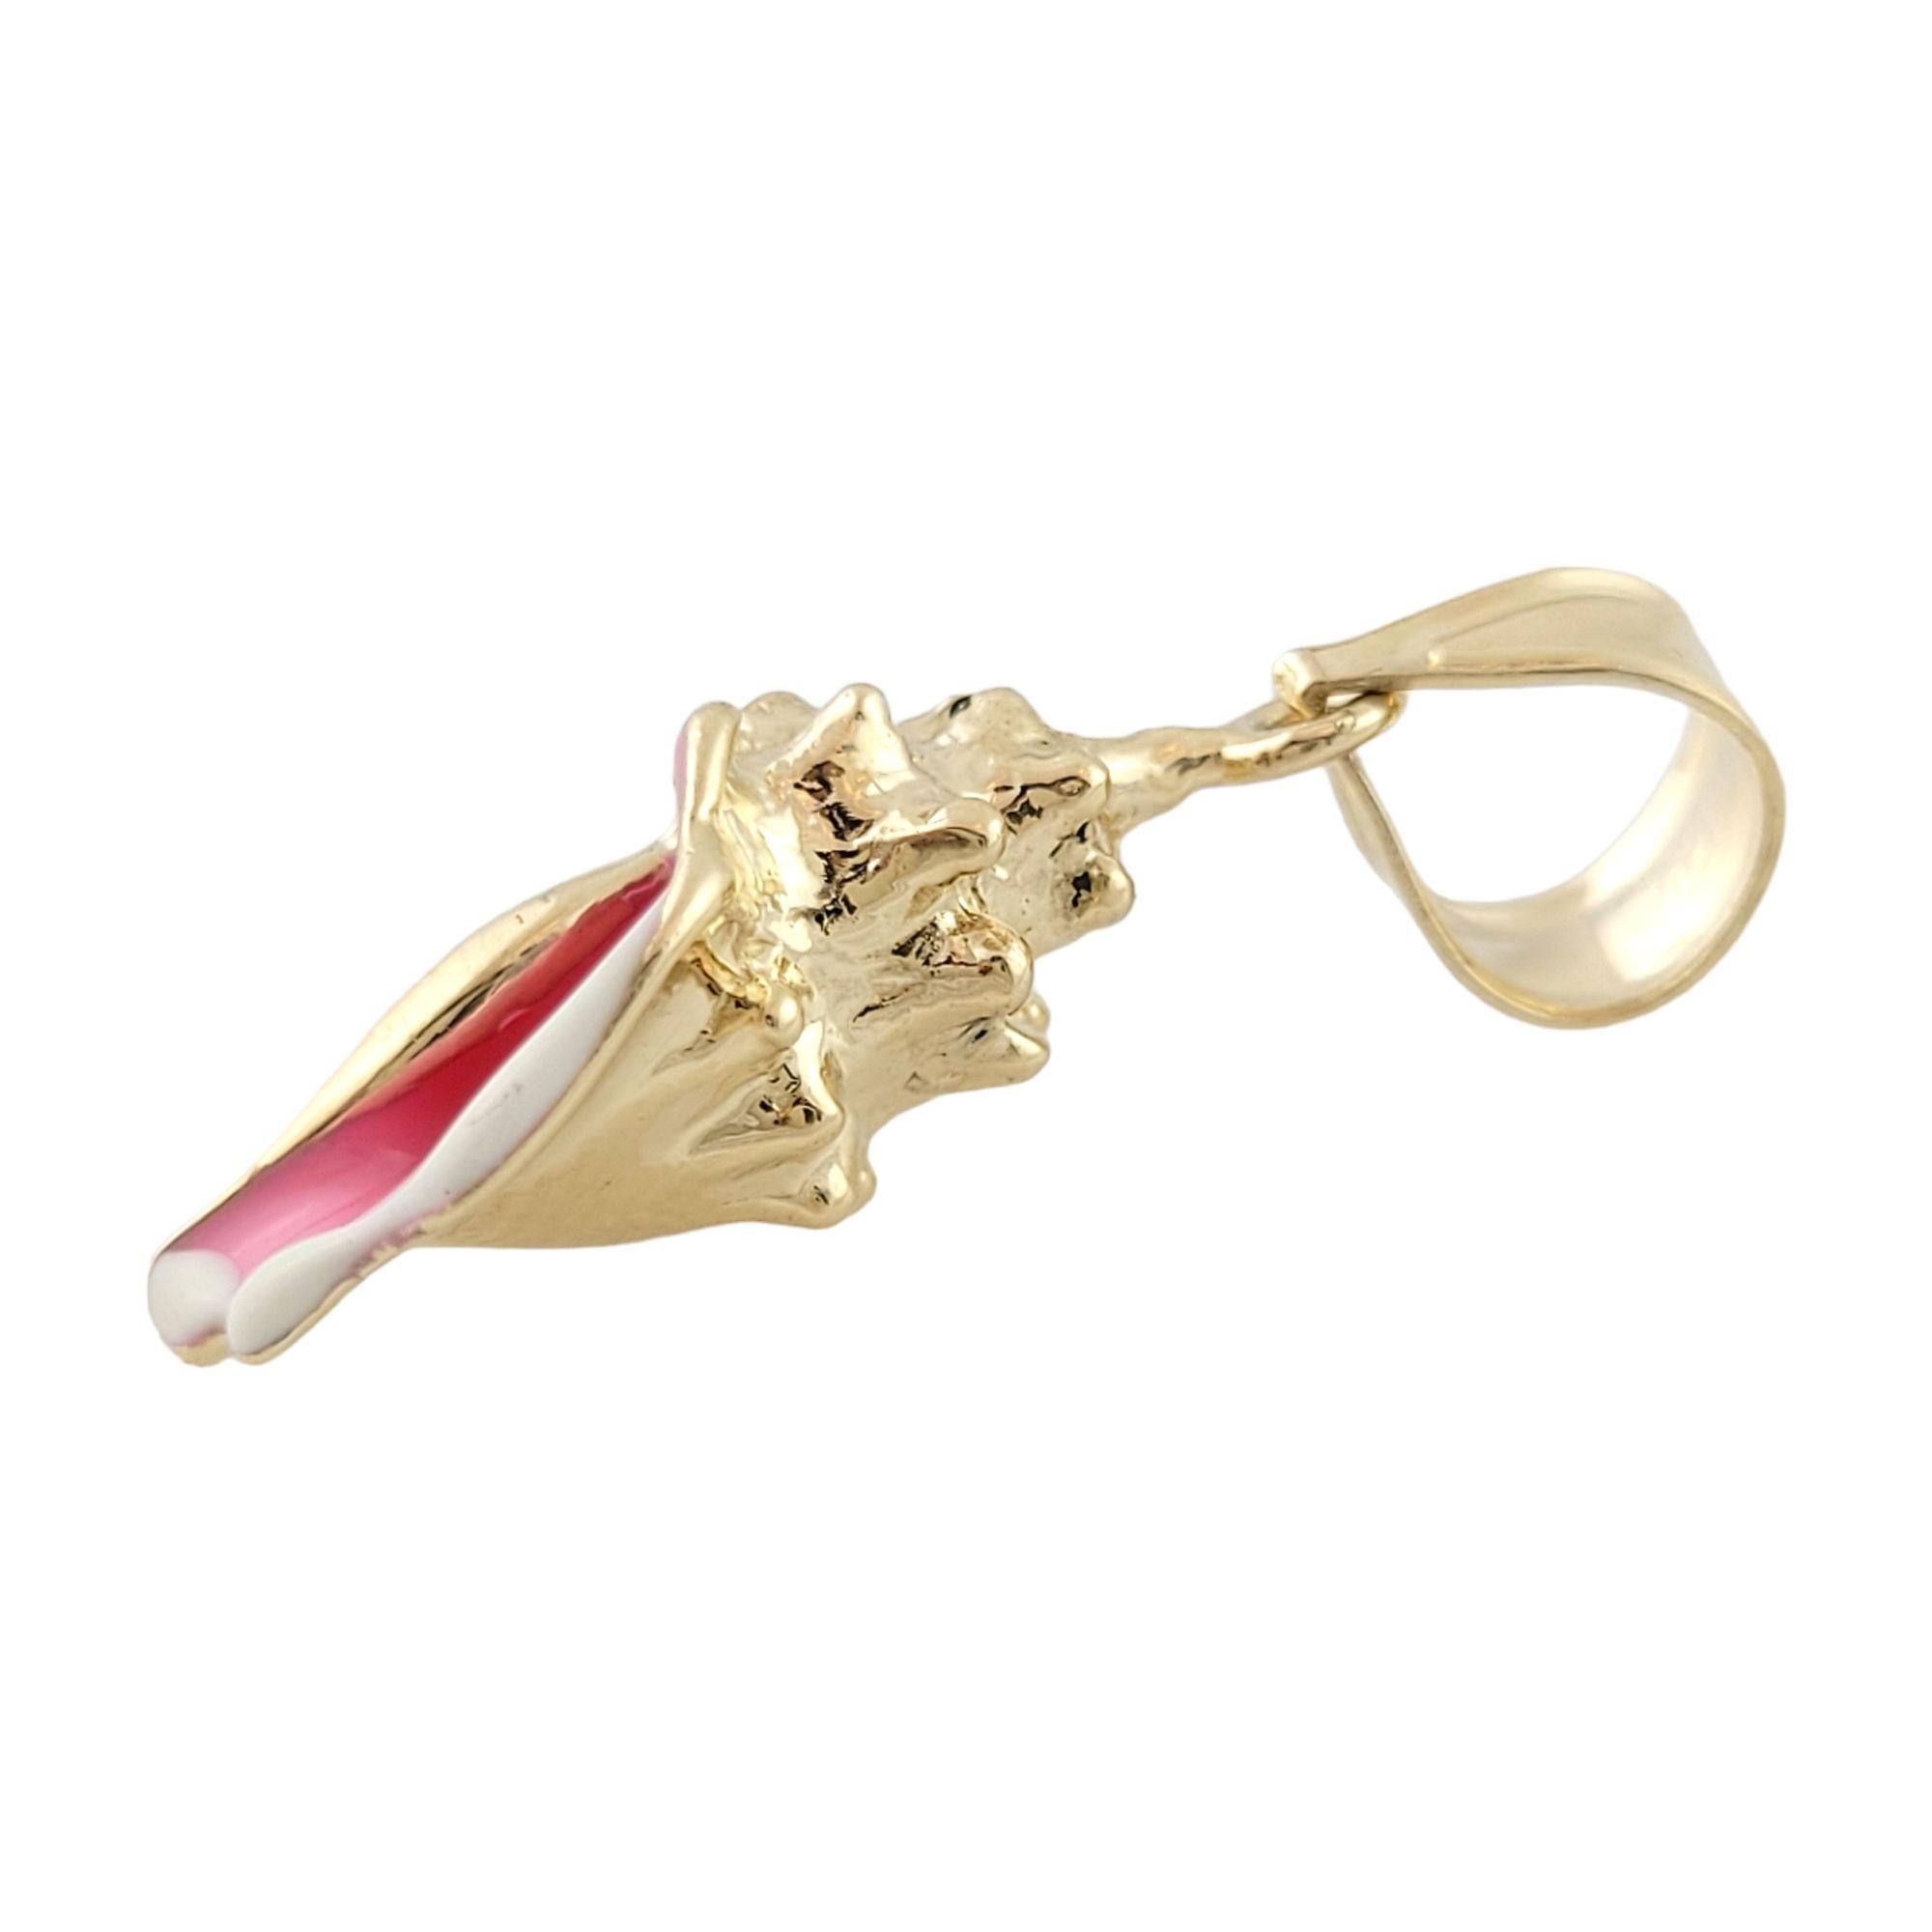 Vintage 14K Yellow Gold Sea Shell Charm

This adorable 14K yellow gold sea shell conch charm is decorated with beautiful pink and white enamel!

Size: 18mm X 9.5mm X 7mm

Length w/ bail: 28mm

Weight: 2.3 g/ 1.4 dwt

Hallmark: 14K MM

Very good